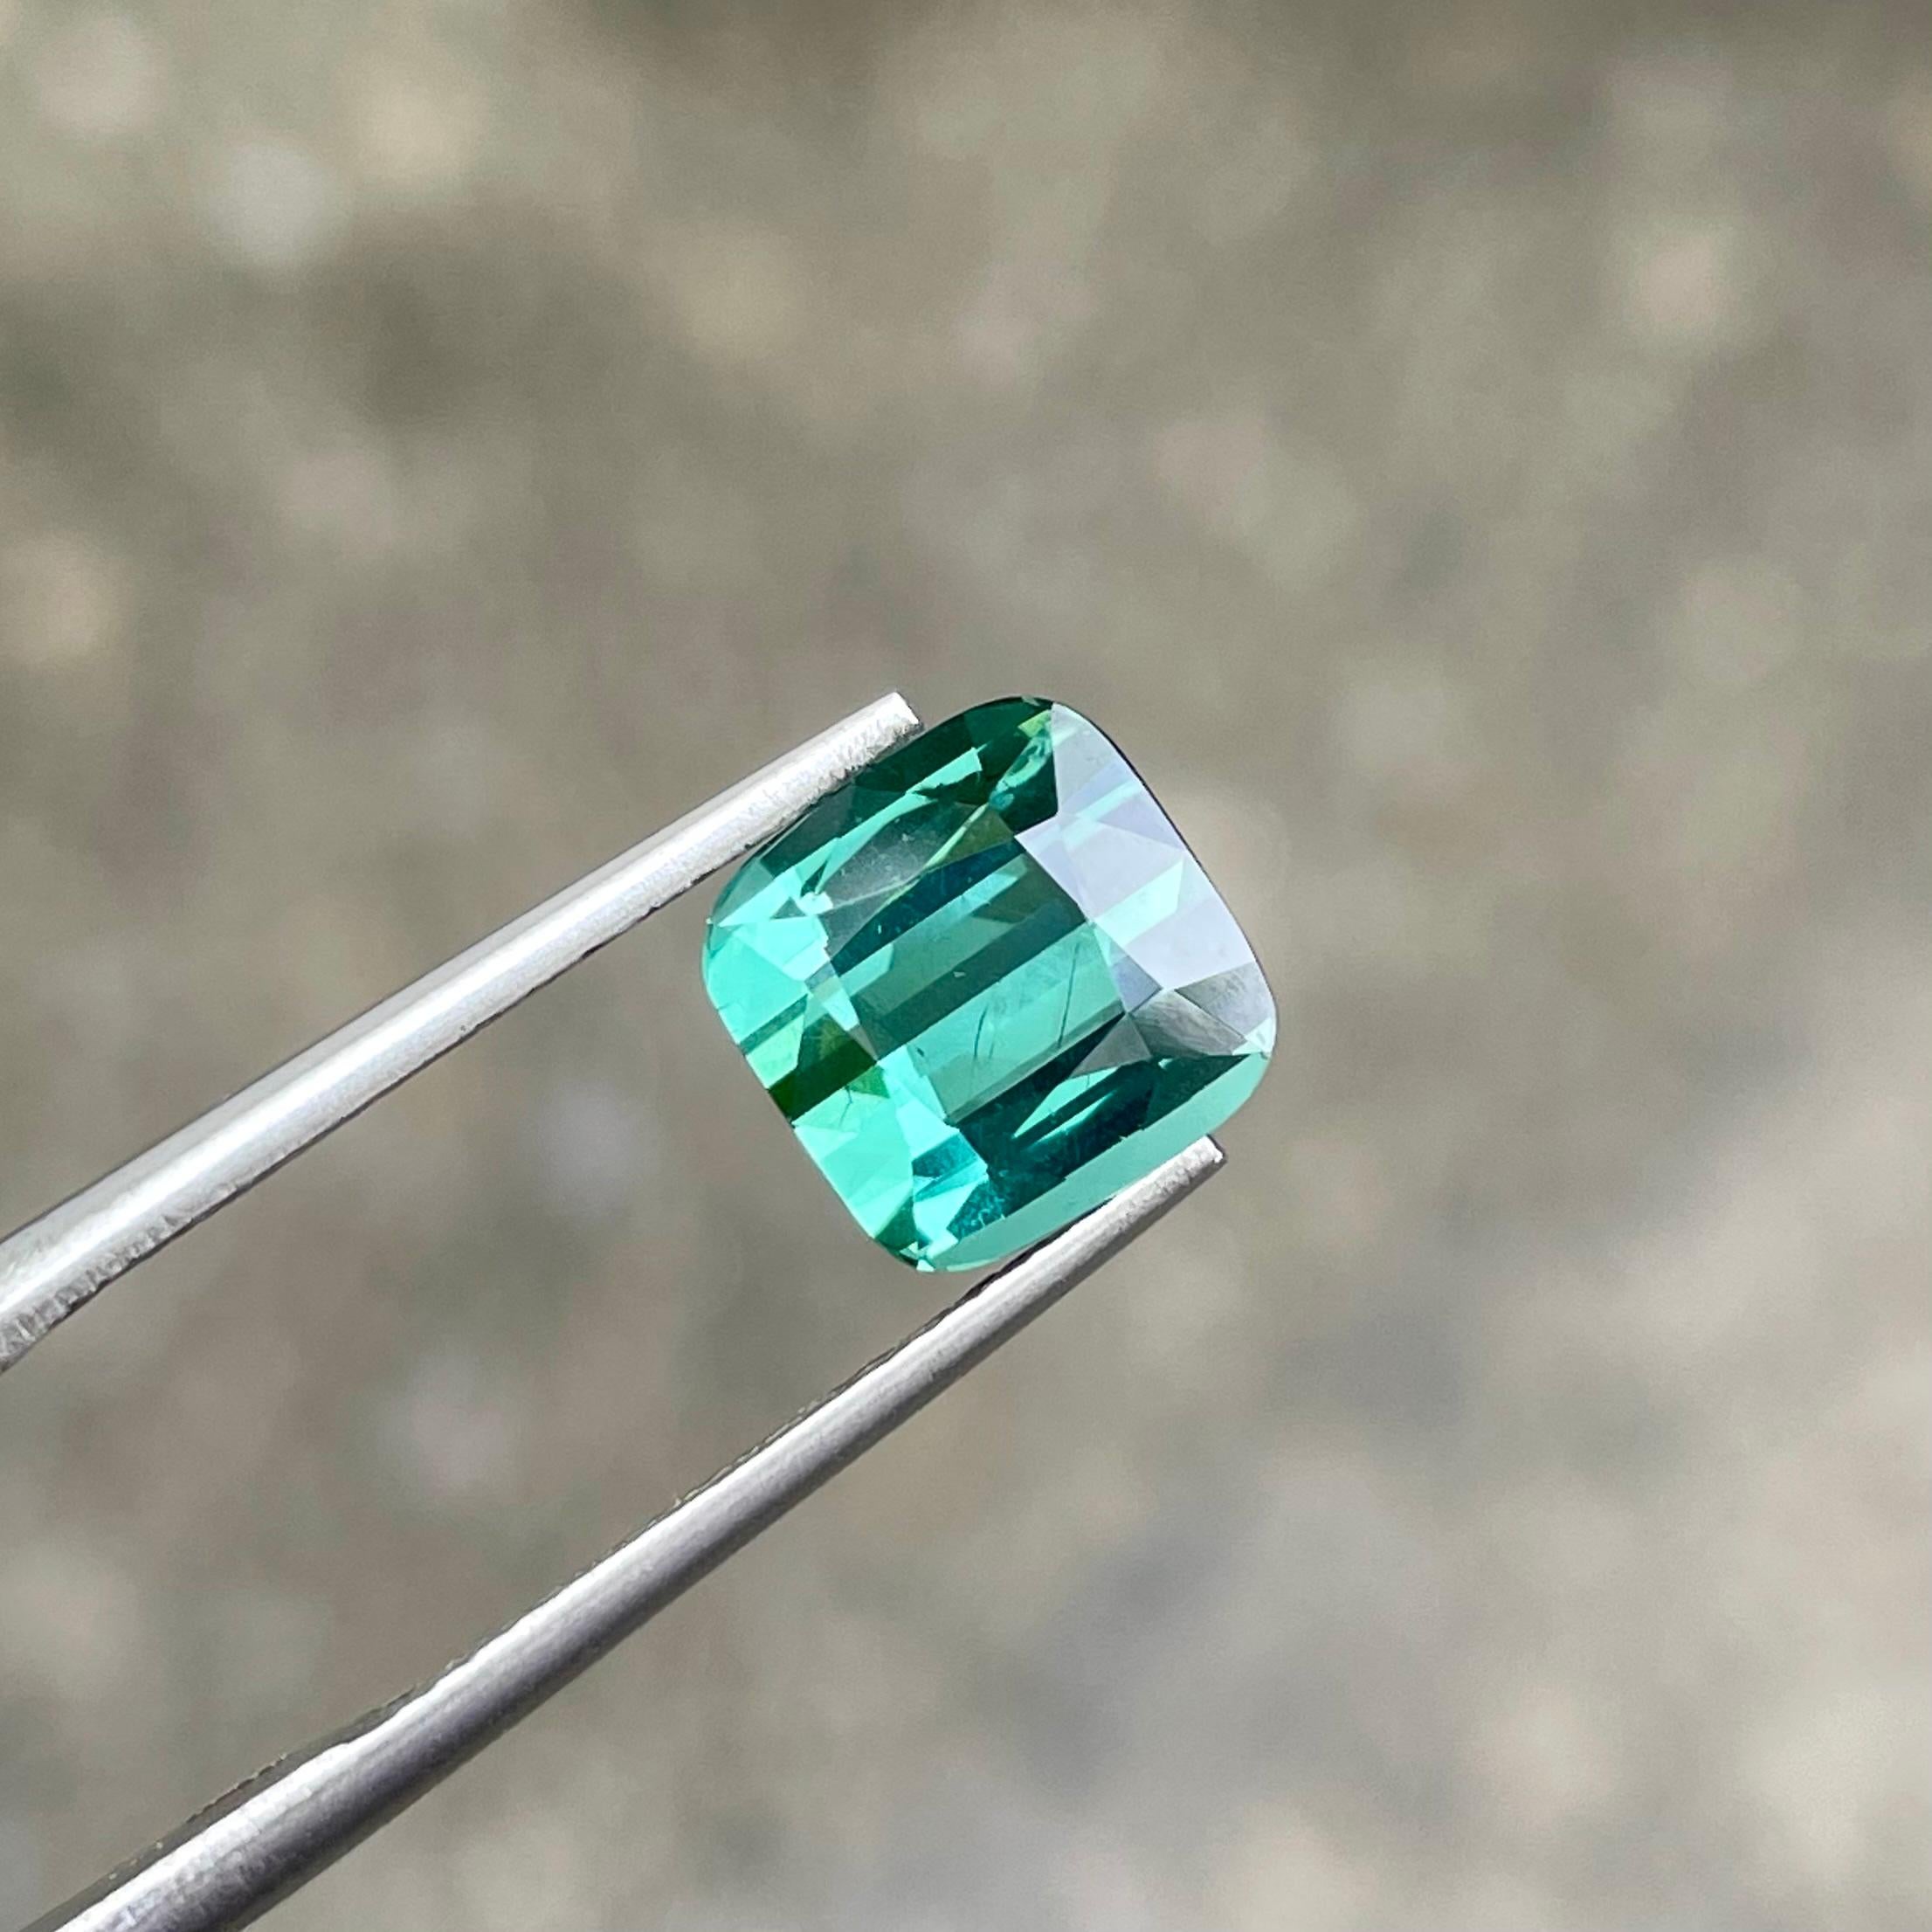 Weight 3.20 carats 
Dimensions 8.1 x 8.2 x 5.8 mm
Treatment None 
Origin Africa 
Clarity VVS (Very, Very Slightly Included)
Shape Cushion 
Cut Fancy Cushion 




The bluish green Tourmaline is a stunning 3.20 carat gemstone with an elegant cushion